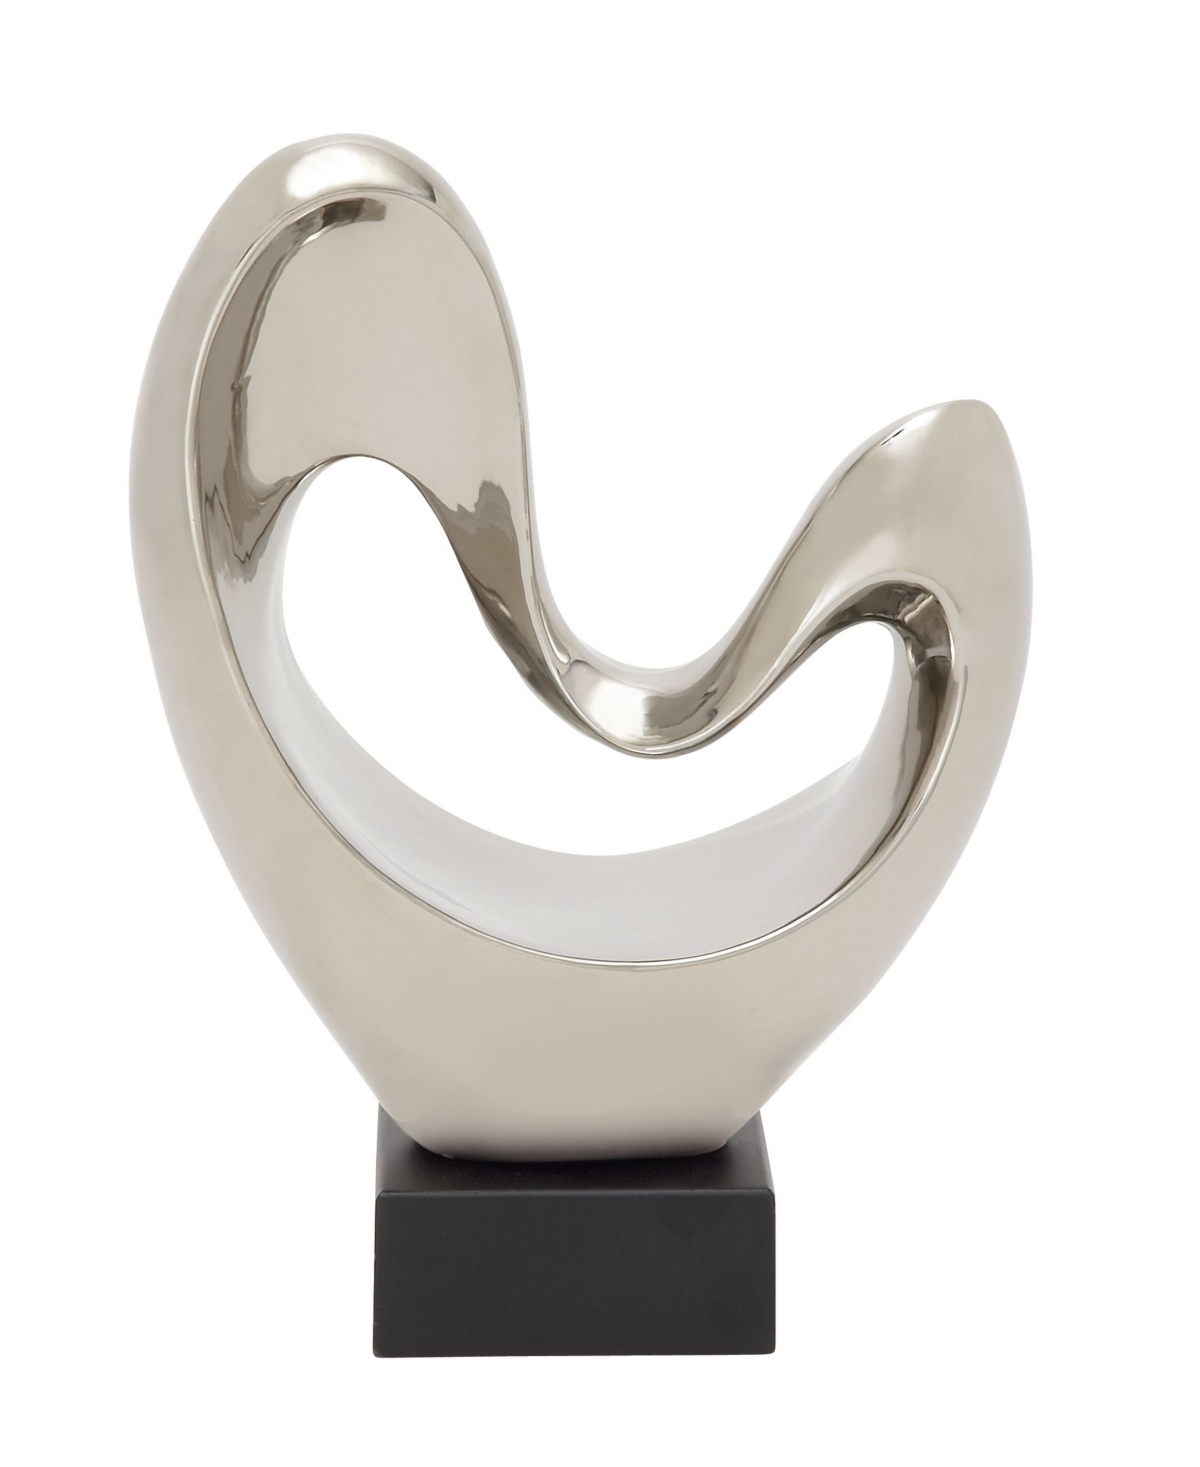 Rosemary Lane Modern Abstract Sculpture, 14" X 10" In Silver-tone